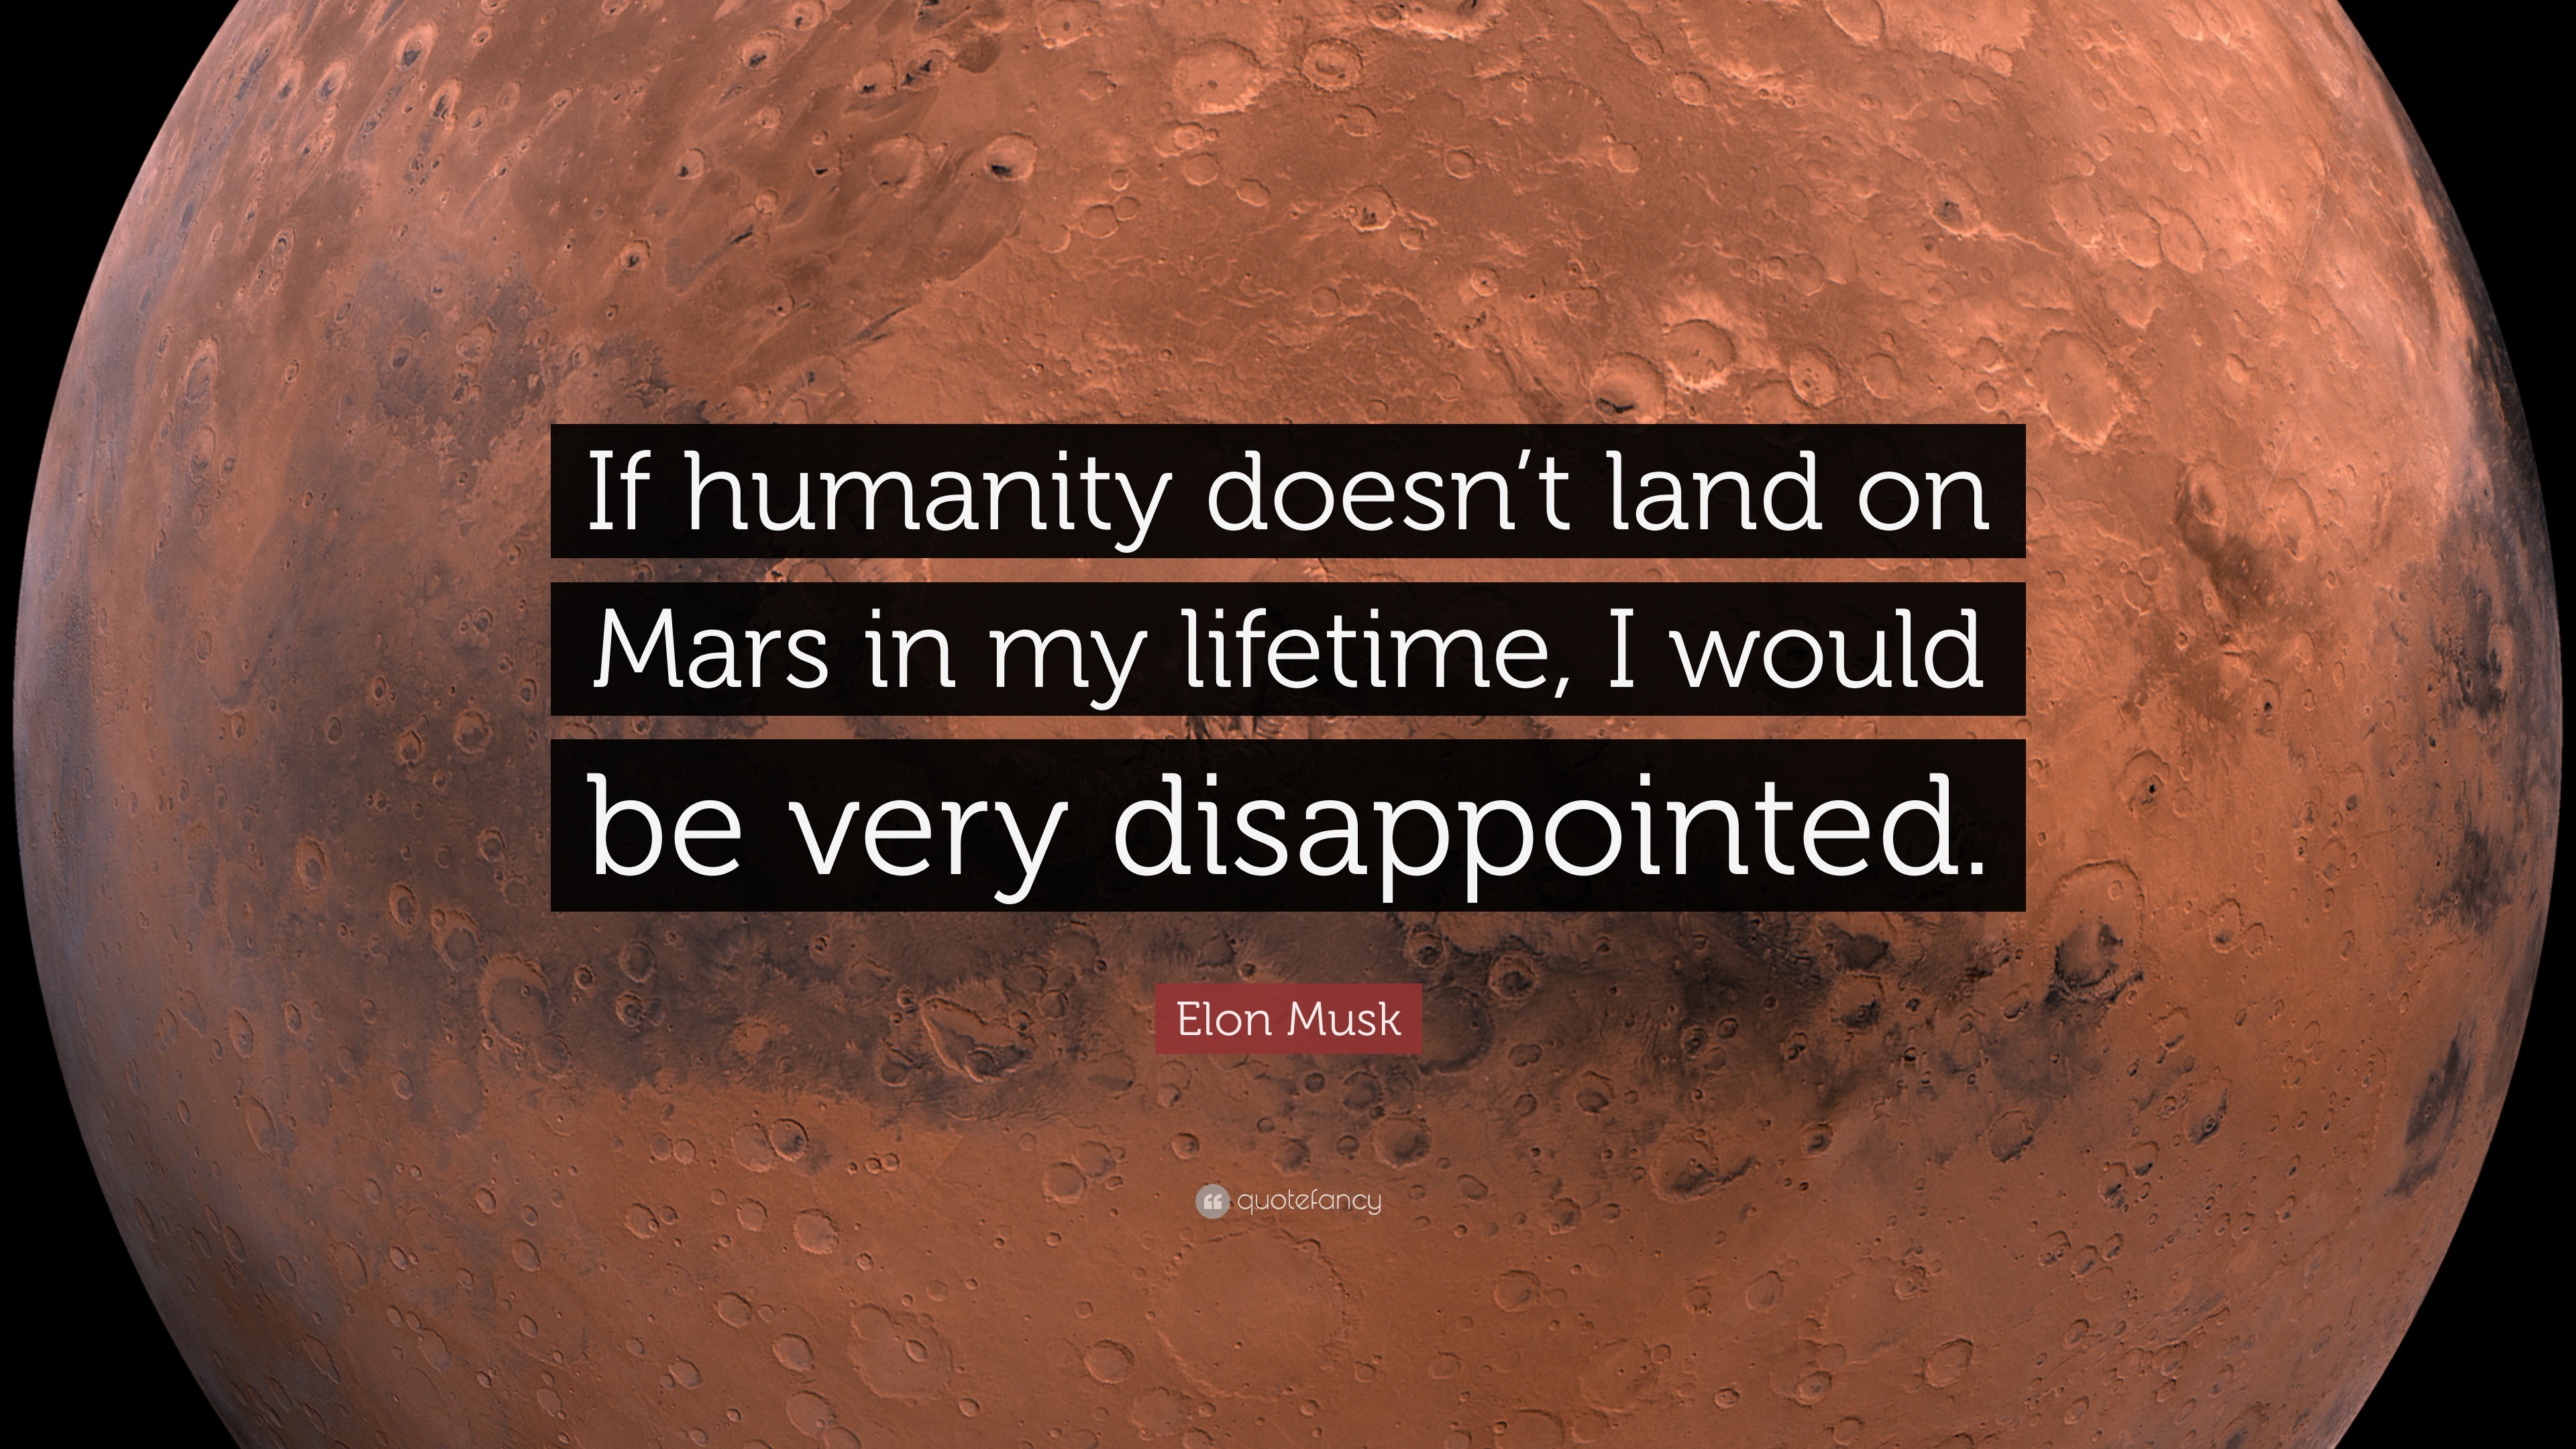 3840x2160 Elon Musk Quote: “If humanity doesn't land on Mars in my lifetime